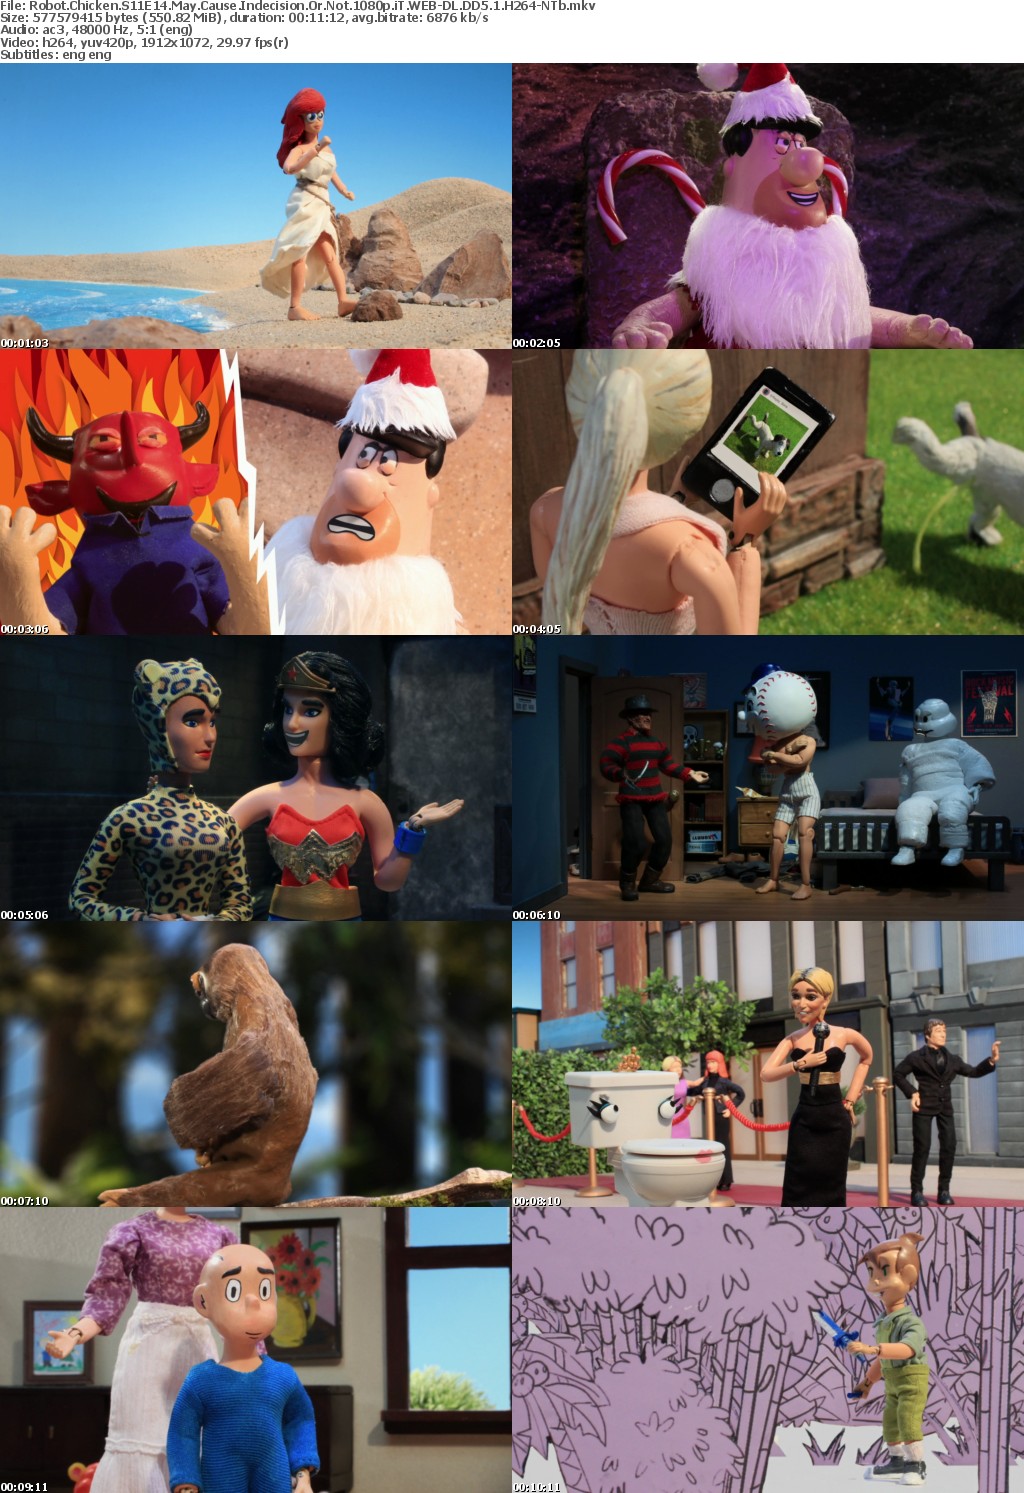 Robot Chicken S11E14 May Cause Indecision Or Not 1080p WEB-DL DD5 1 H264-NTb